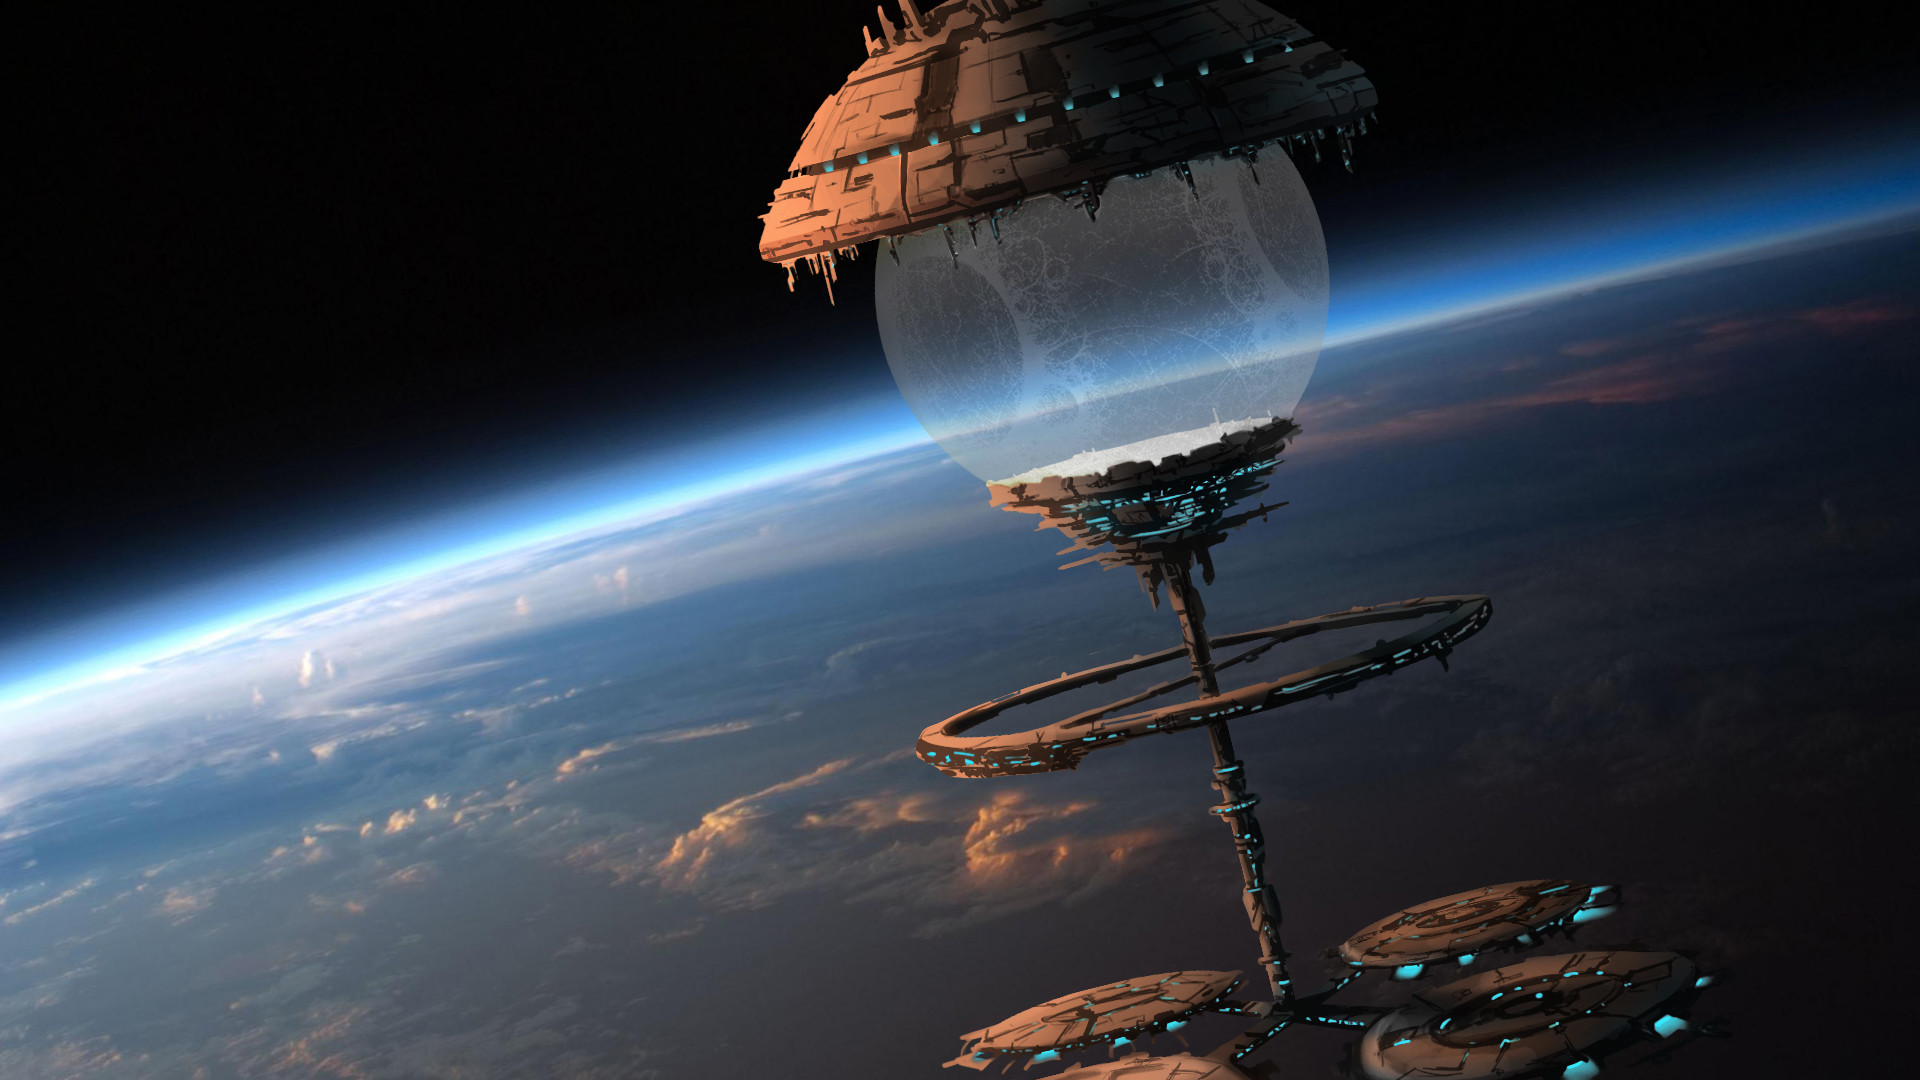 Space Orbital Stations Sci Fi Spaceship Spacecraft Citys Art Planets Atmosphere Wallpaper 1920x1080 31617 Wallpaperup 1920x1080